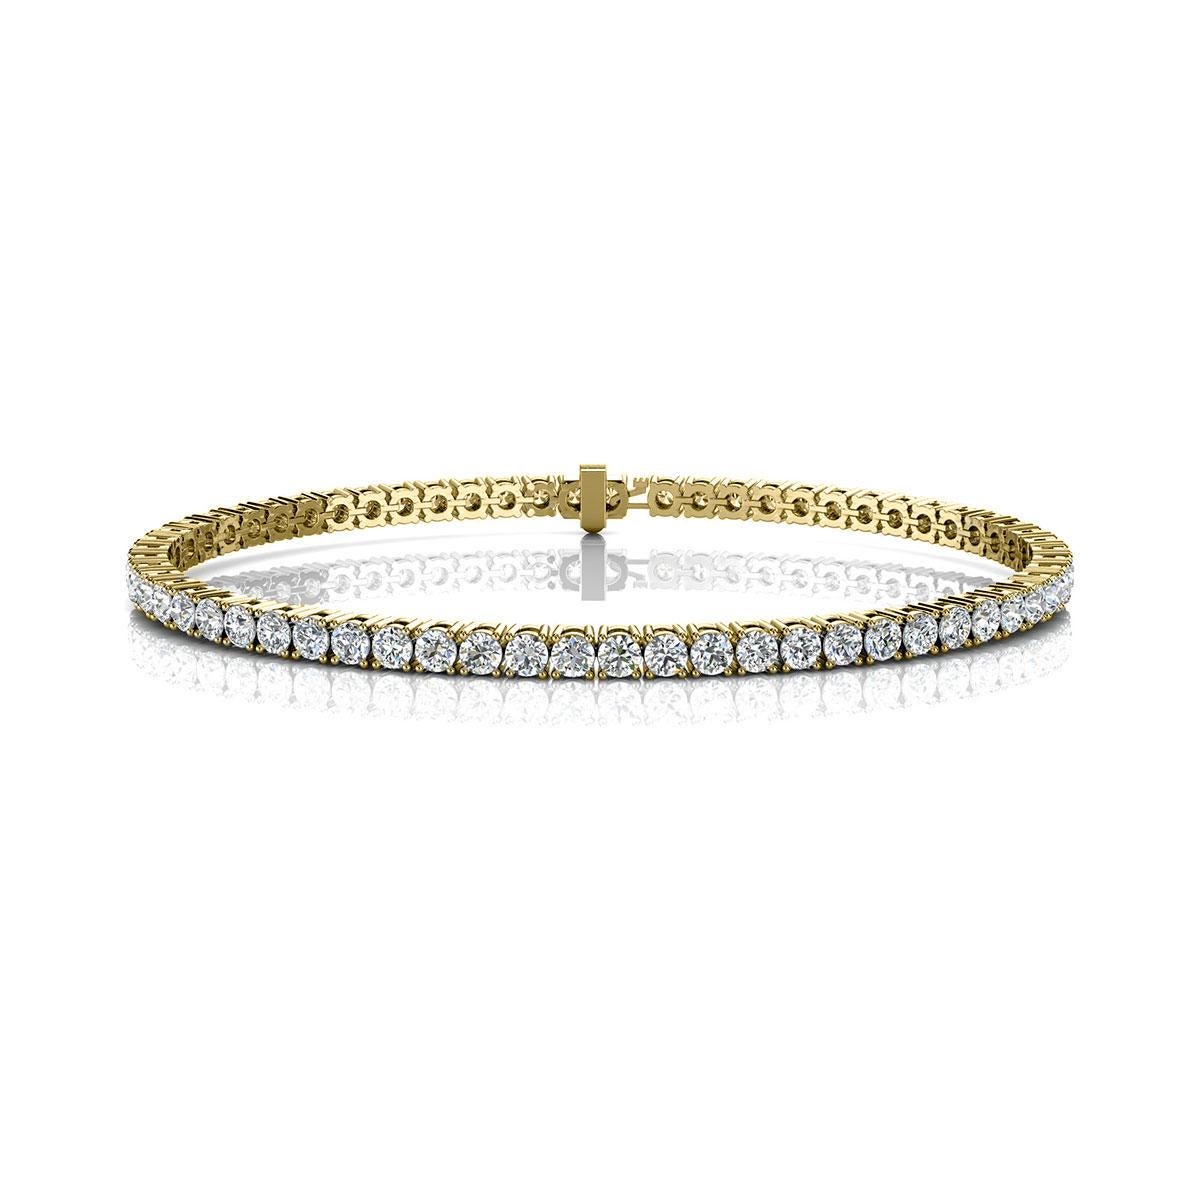 A timeless four prongs diamonds tennis bracelet. Experience the Difference!

Product details: 

Center Gemstone Type: NATURAL DIAMOND
Center Gemstone Color: WHITE
Center Gemstone Shape: ROUND
Center Diamond Carat Weight: 4
Metal: 18K Yellow